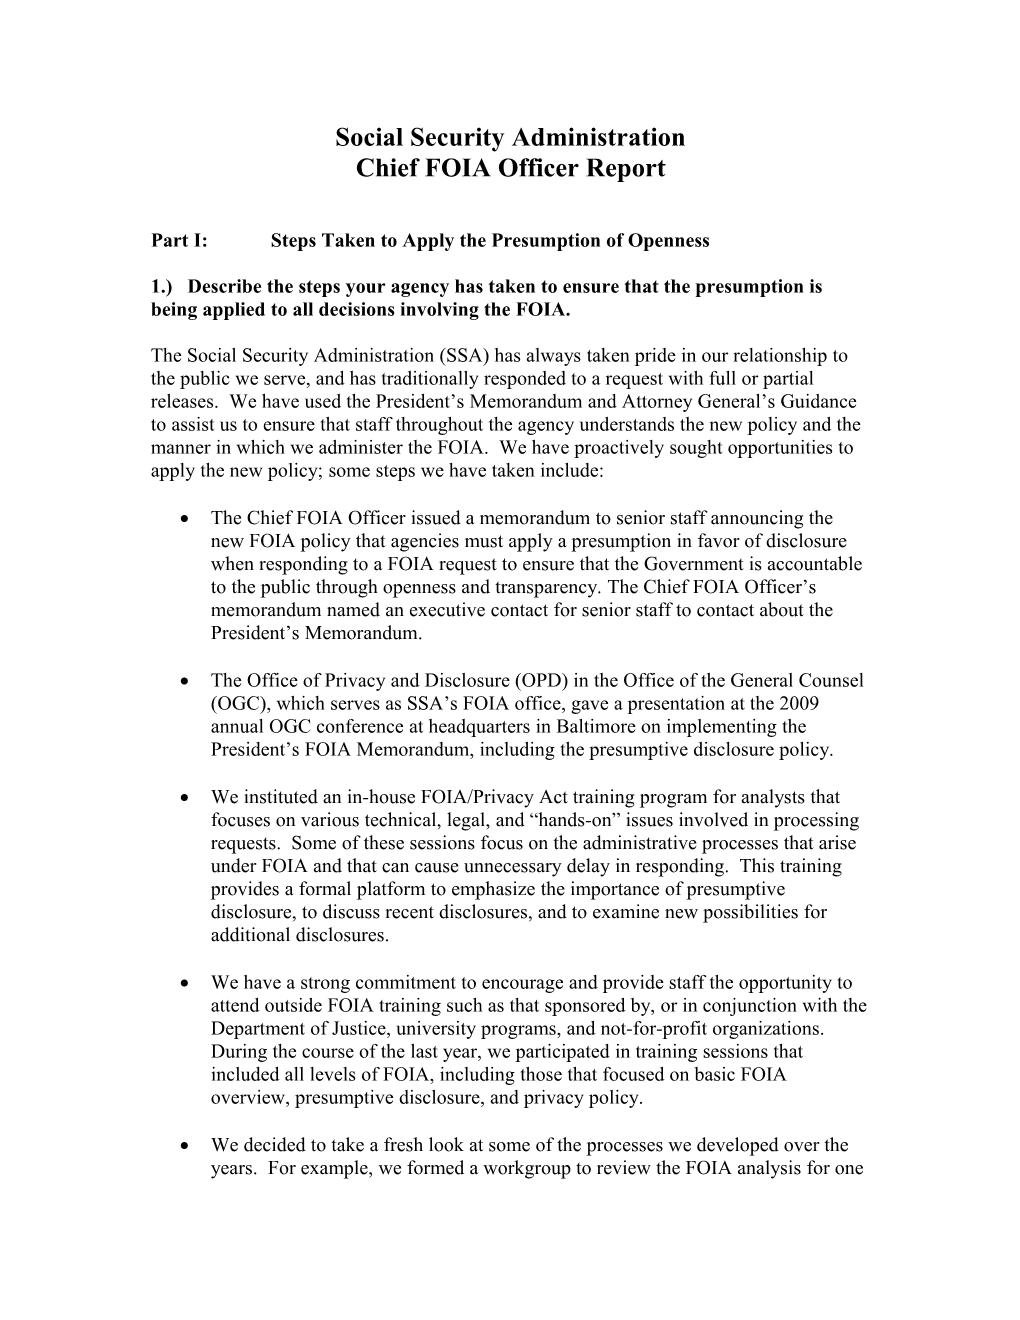 SSA S Chief FOIA Officer Report